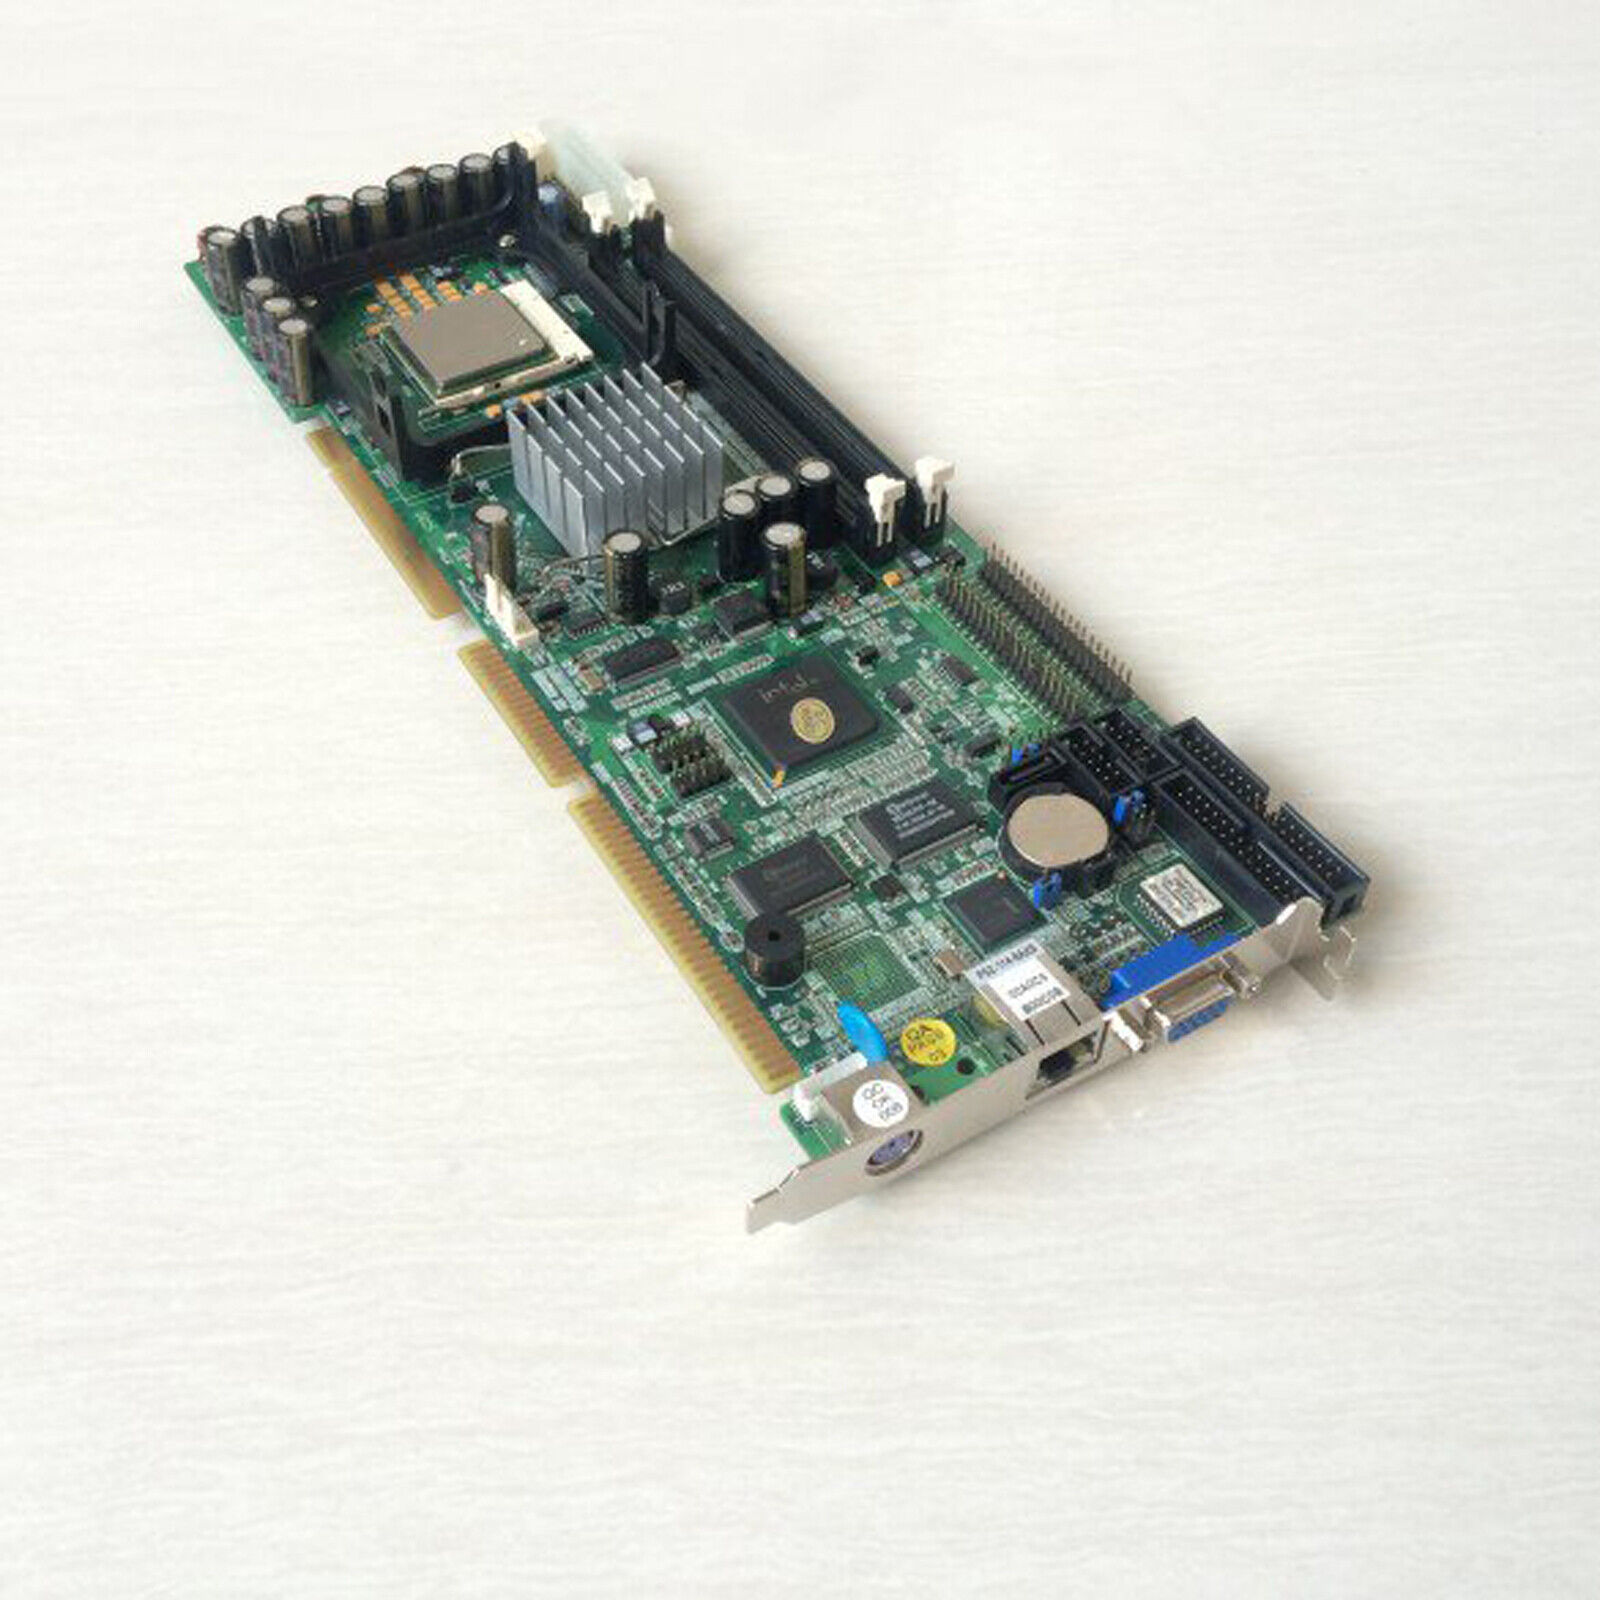 1PC Used PFM-865G 478 full length industrial computer motherboard #XR